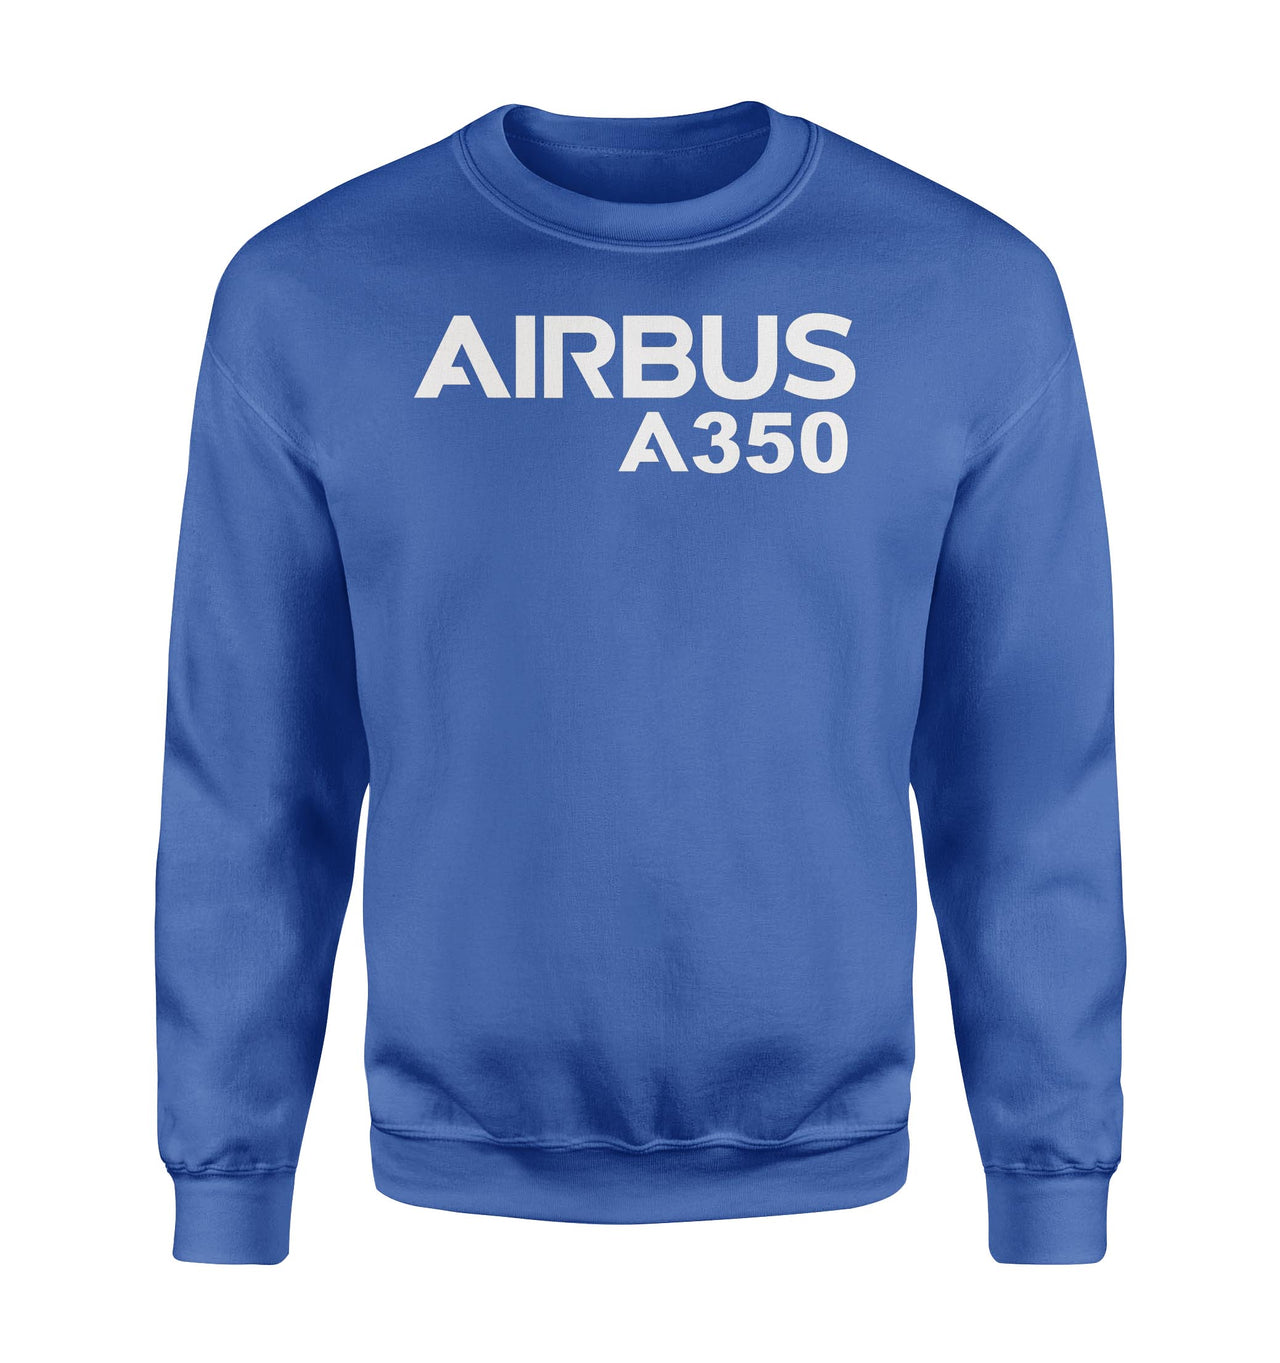 Airbus A350 & Text Designed Sweatshirts